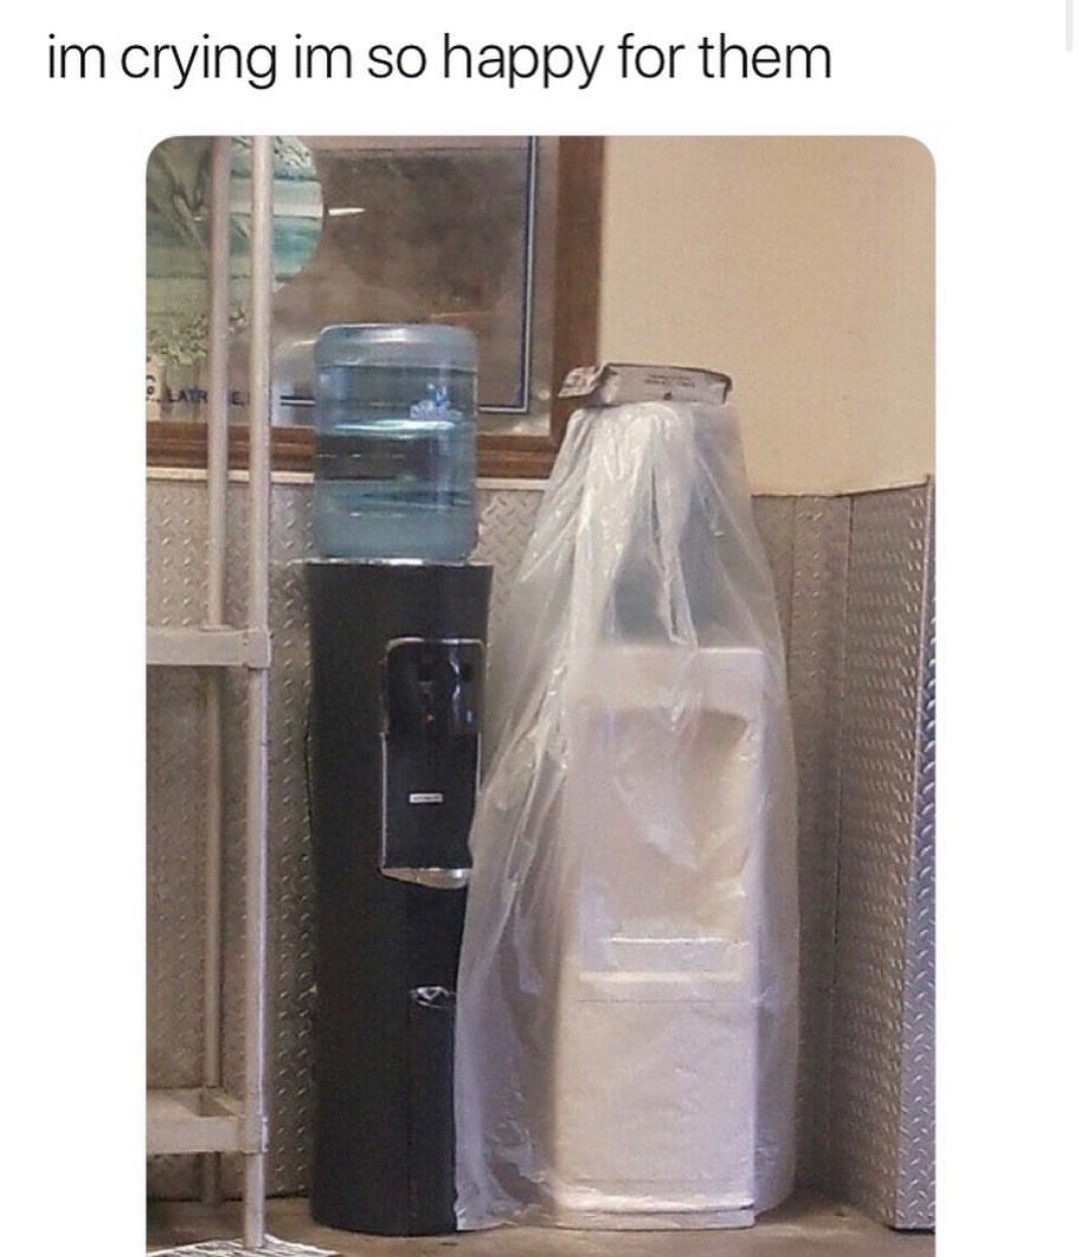 Water ducts at the wedding - meme